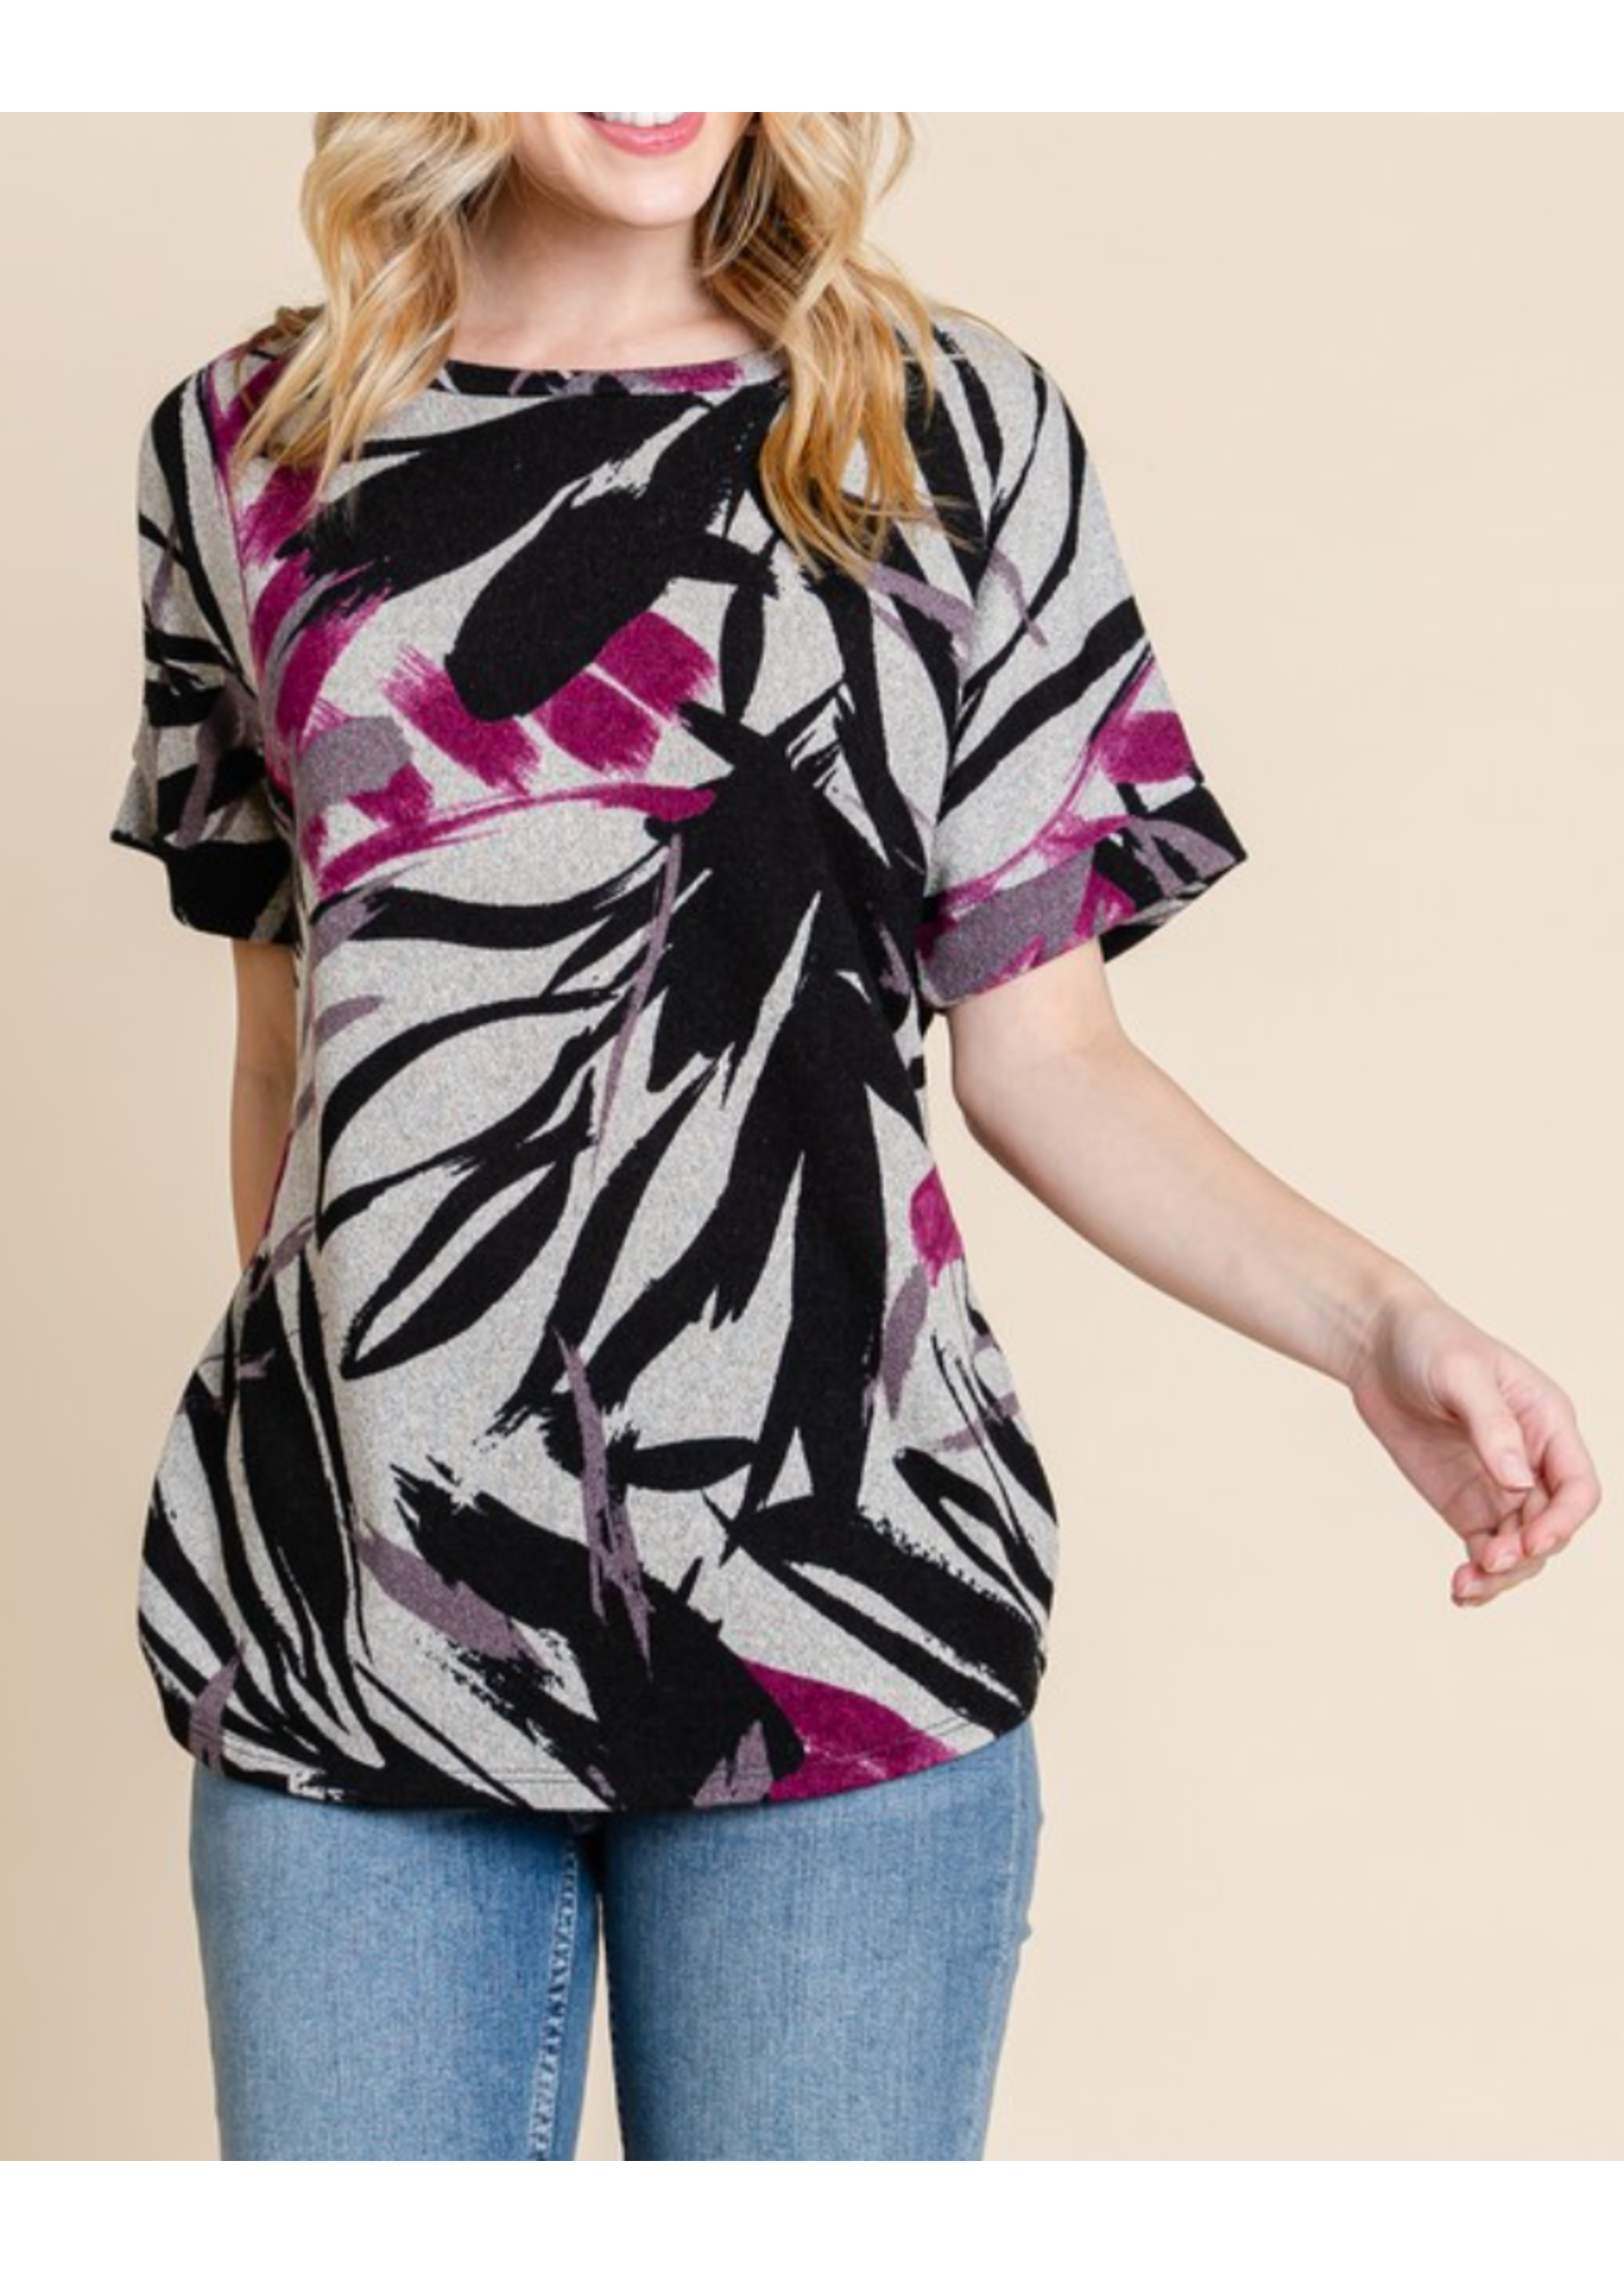 BBTL1950 - RELAXED KNIT PRINTED TOP